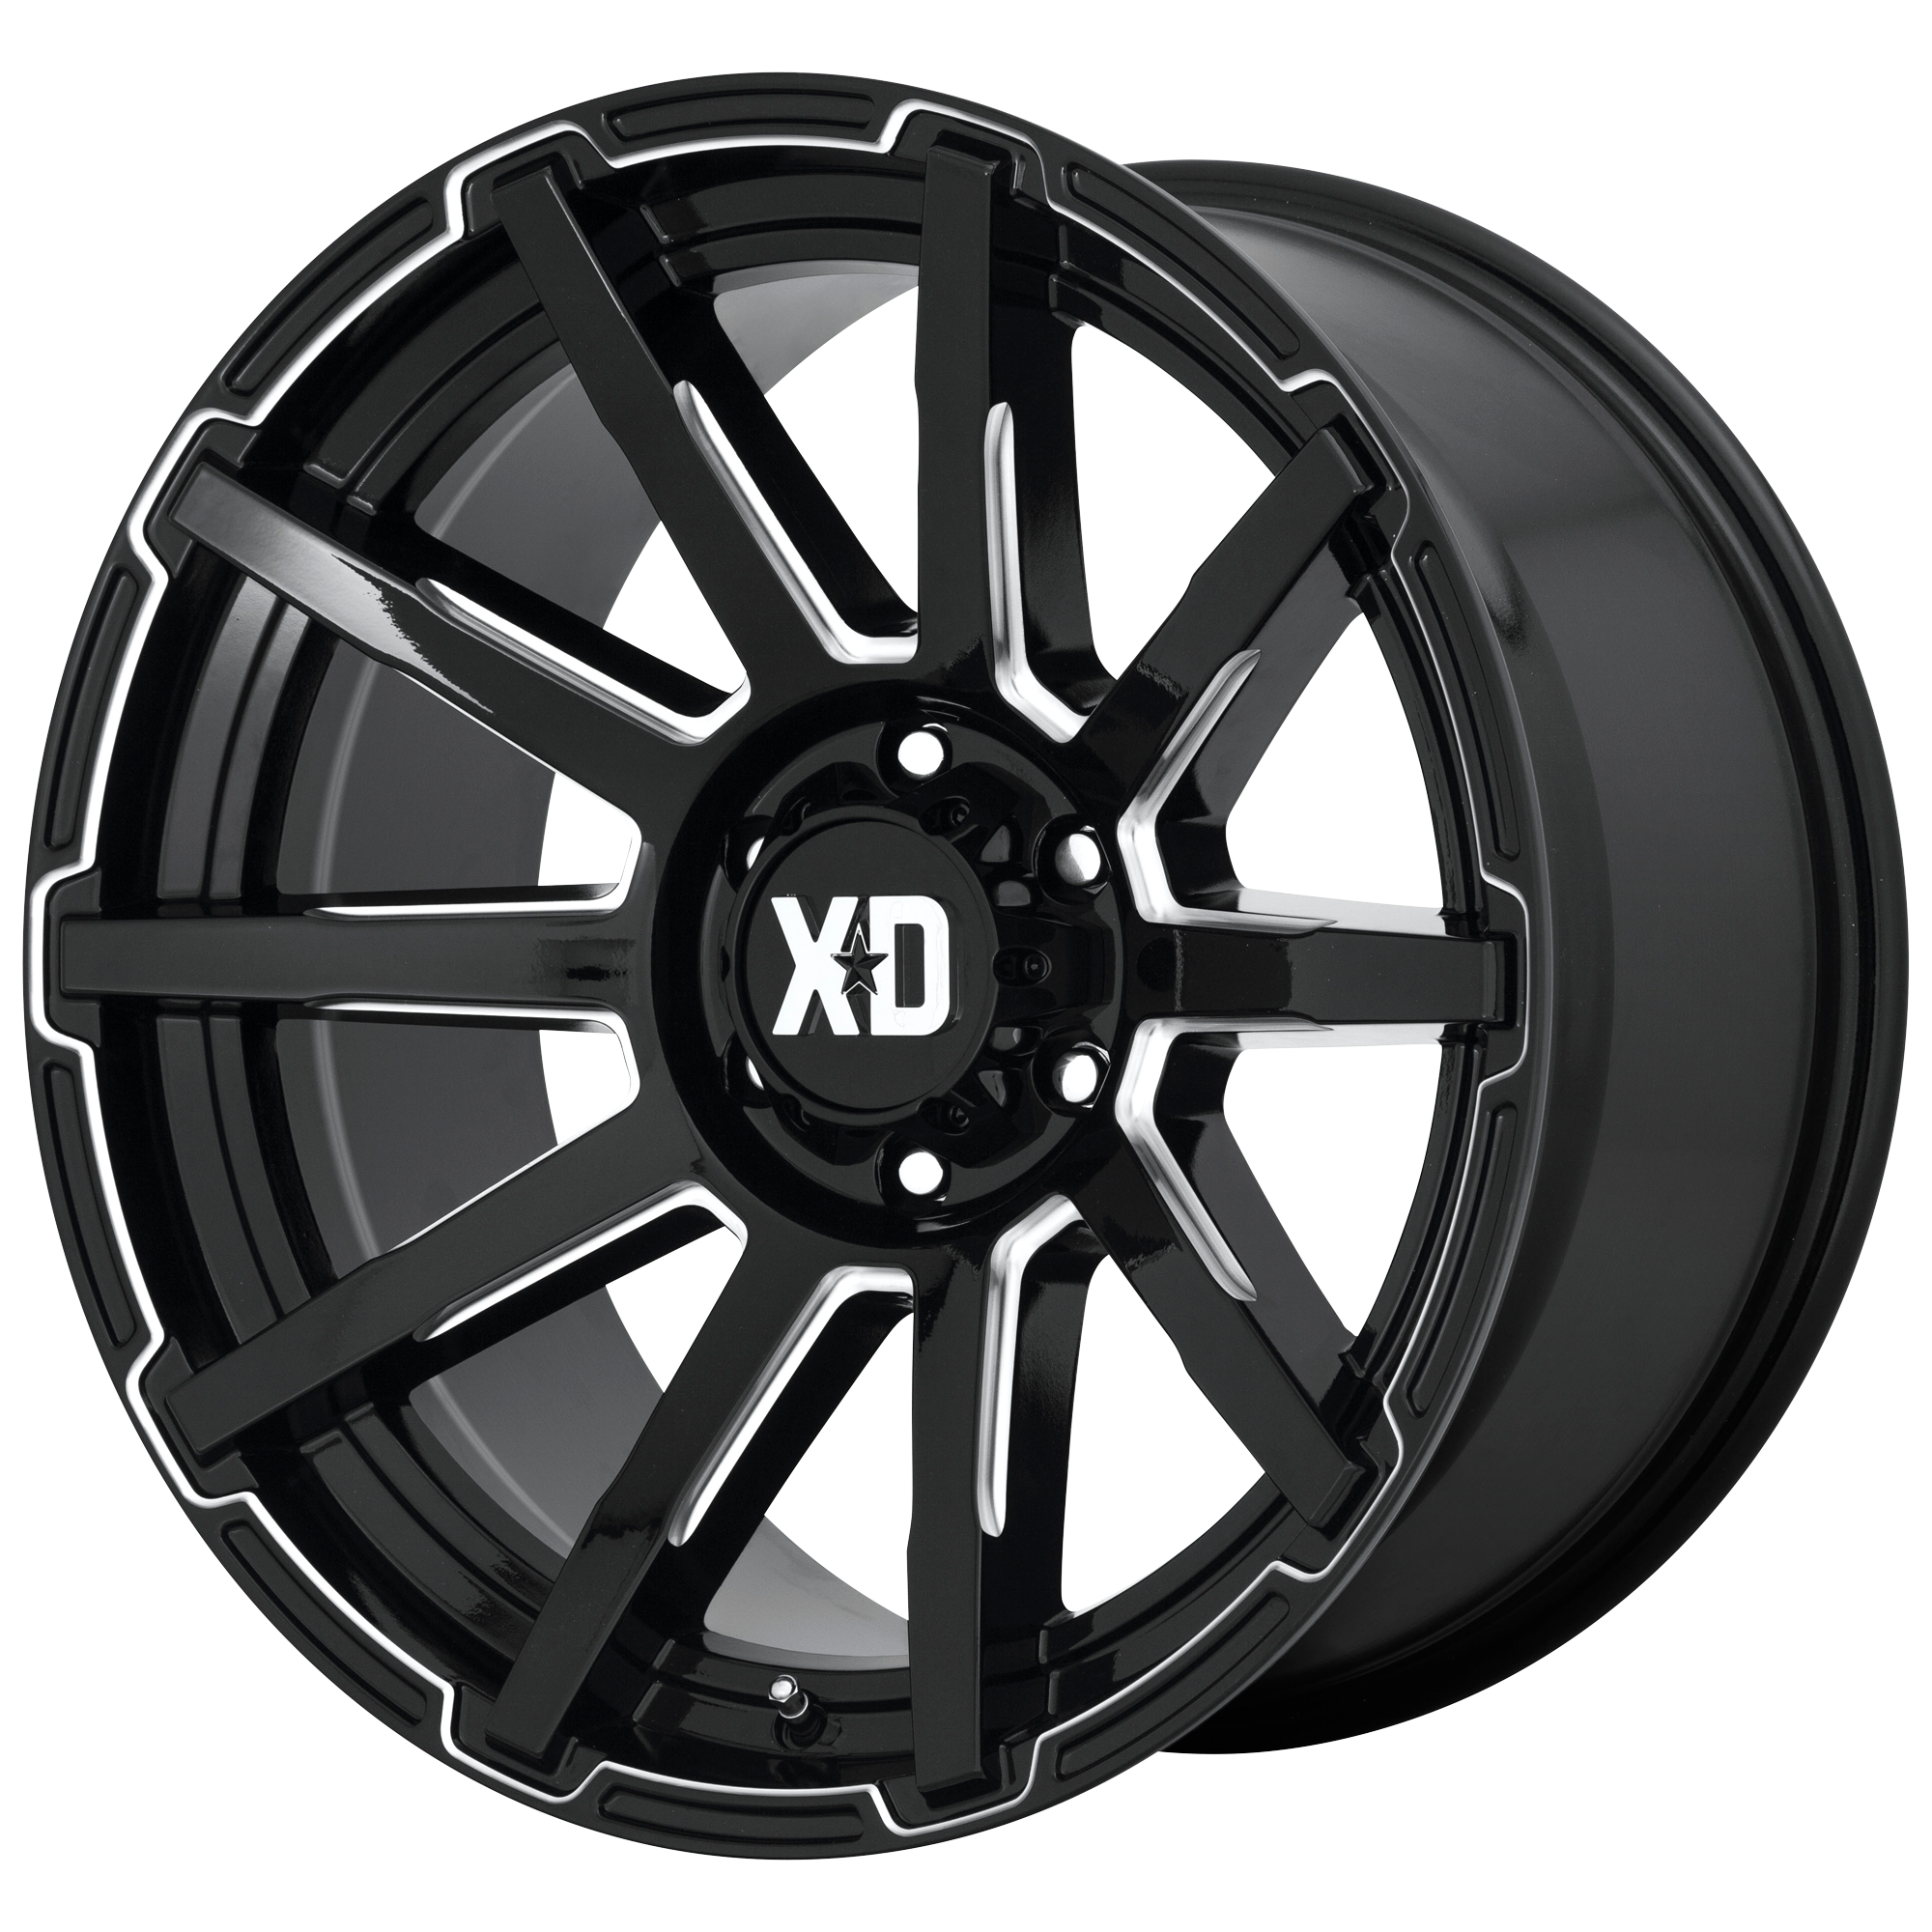 OUTBREAK 18x9 6x120.00 GLOSS BLACK MILLED (12 mm) - Tires and Engine Performance